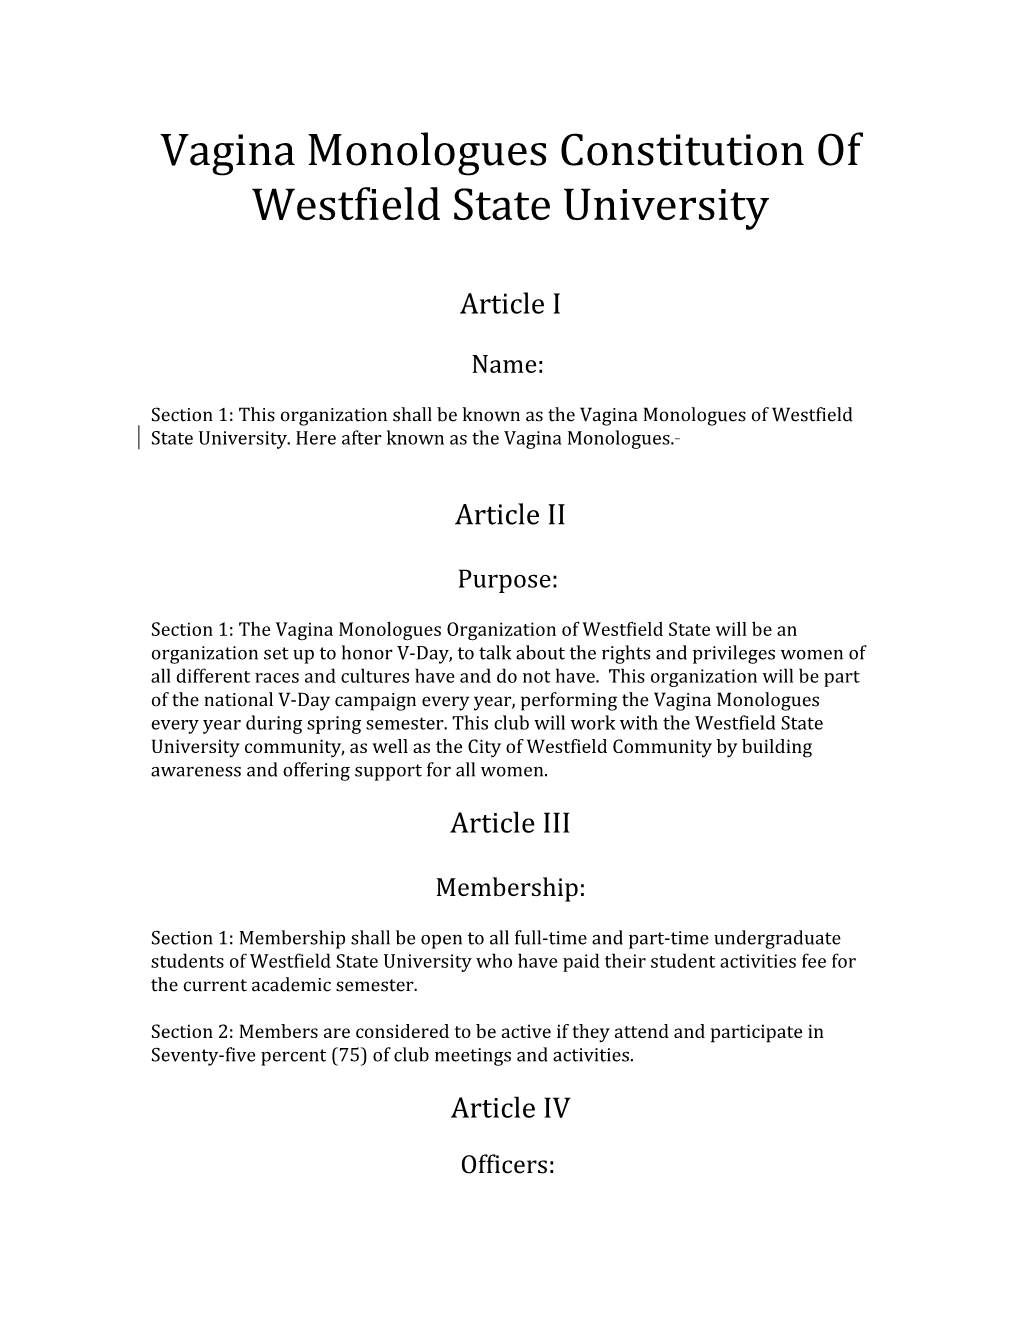 Vagina Monologues Constitutionof Westfield State University